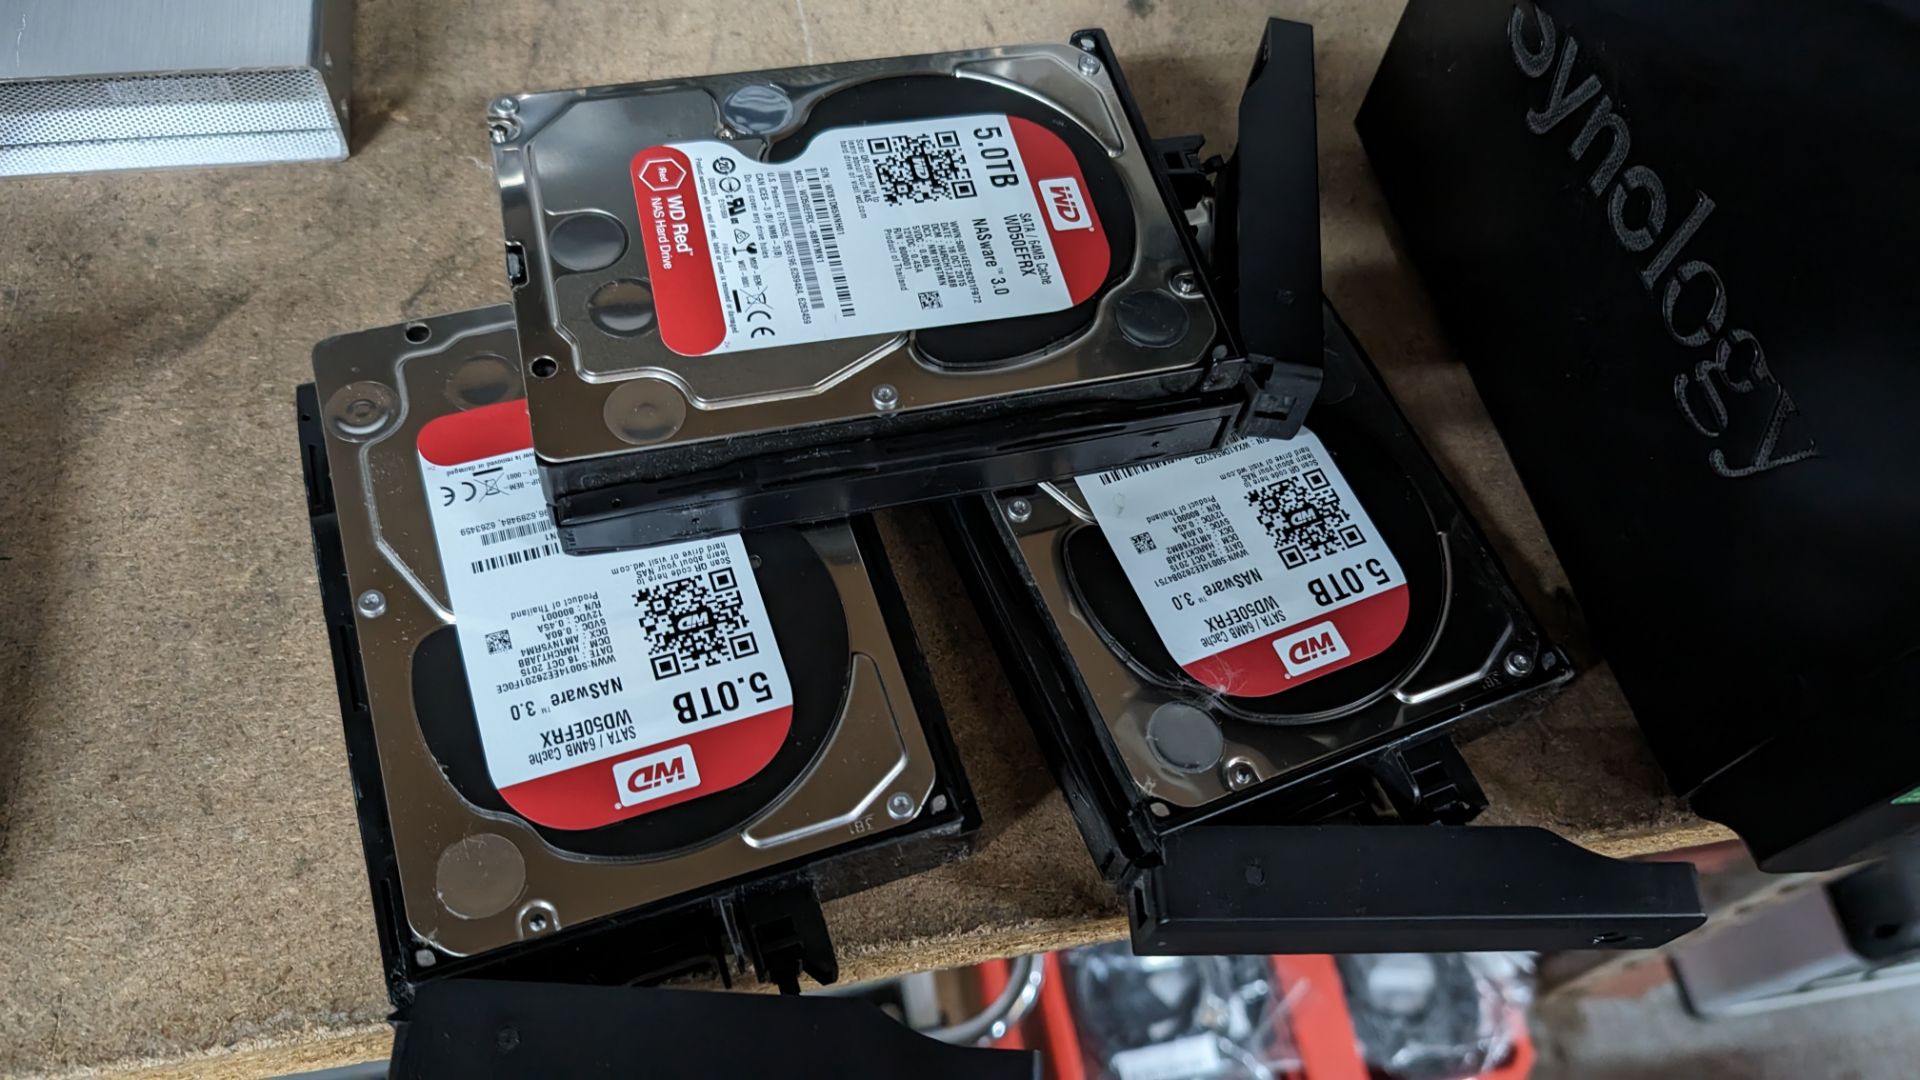 NAS drive with 8 x 5TB hard drives - Image 12 of 15